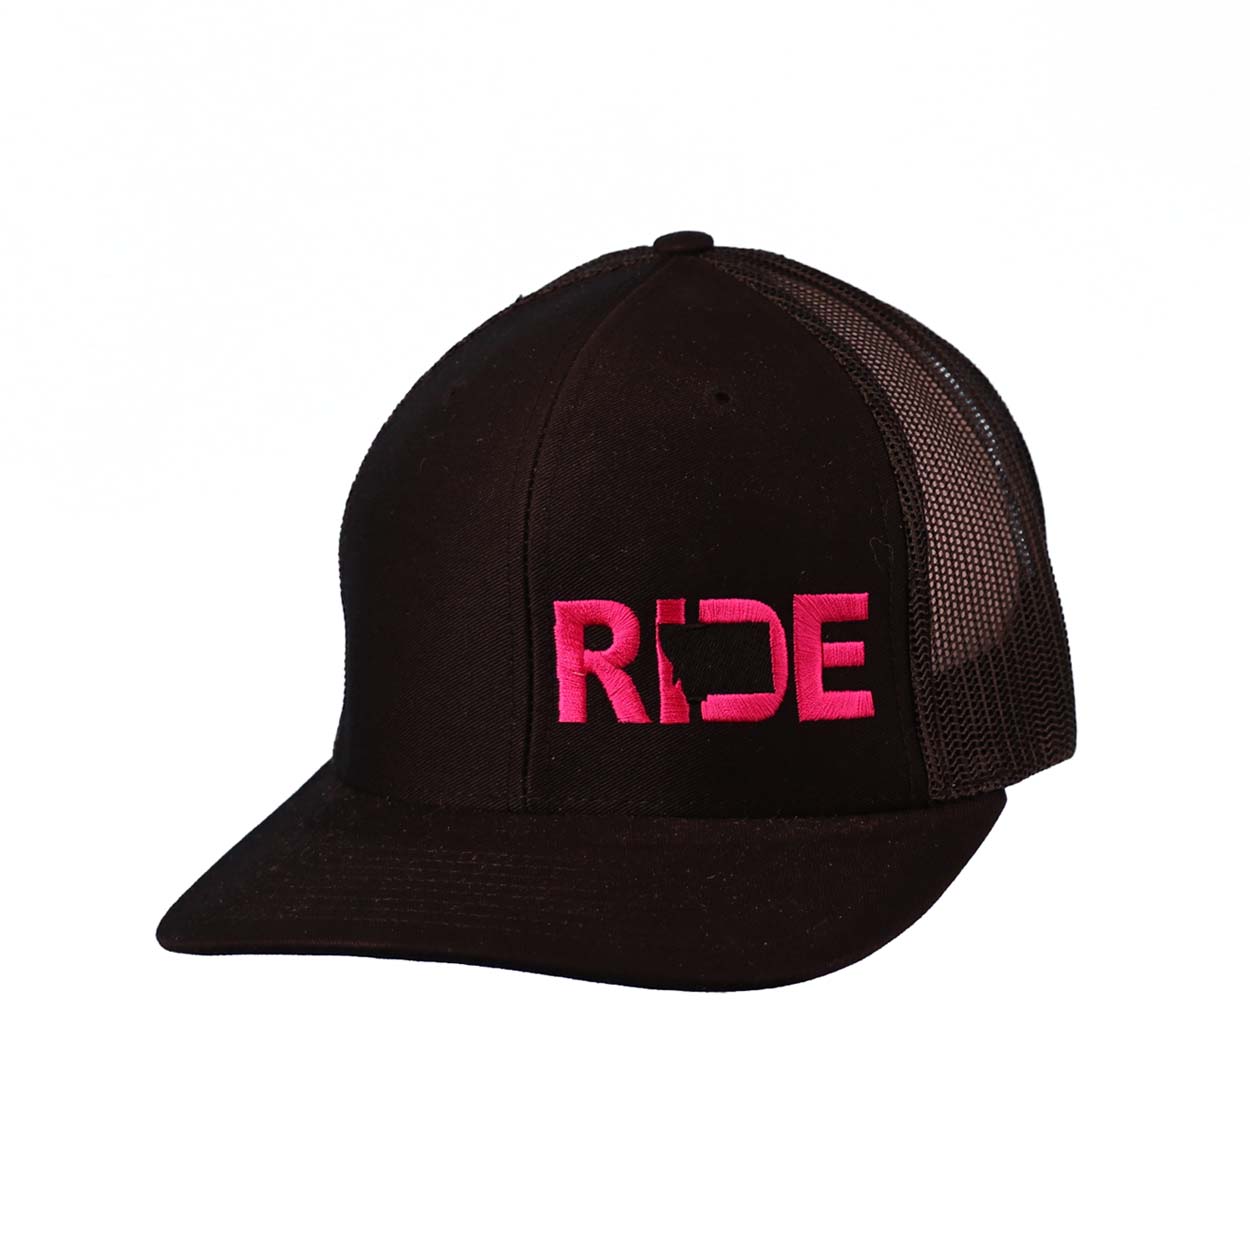 Ride Montana Classic Pro Night Out Embroidered Snapback Trucker Hat Black/Pink